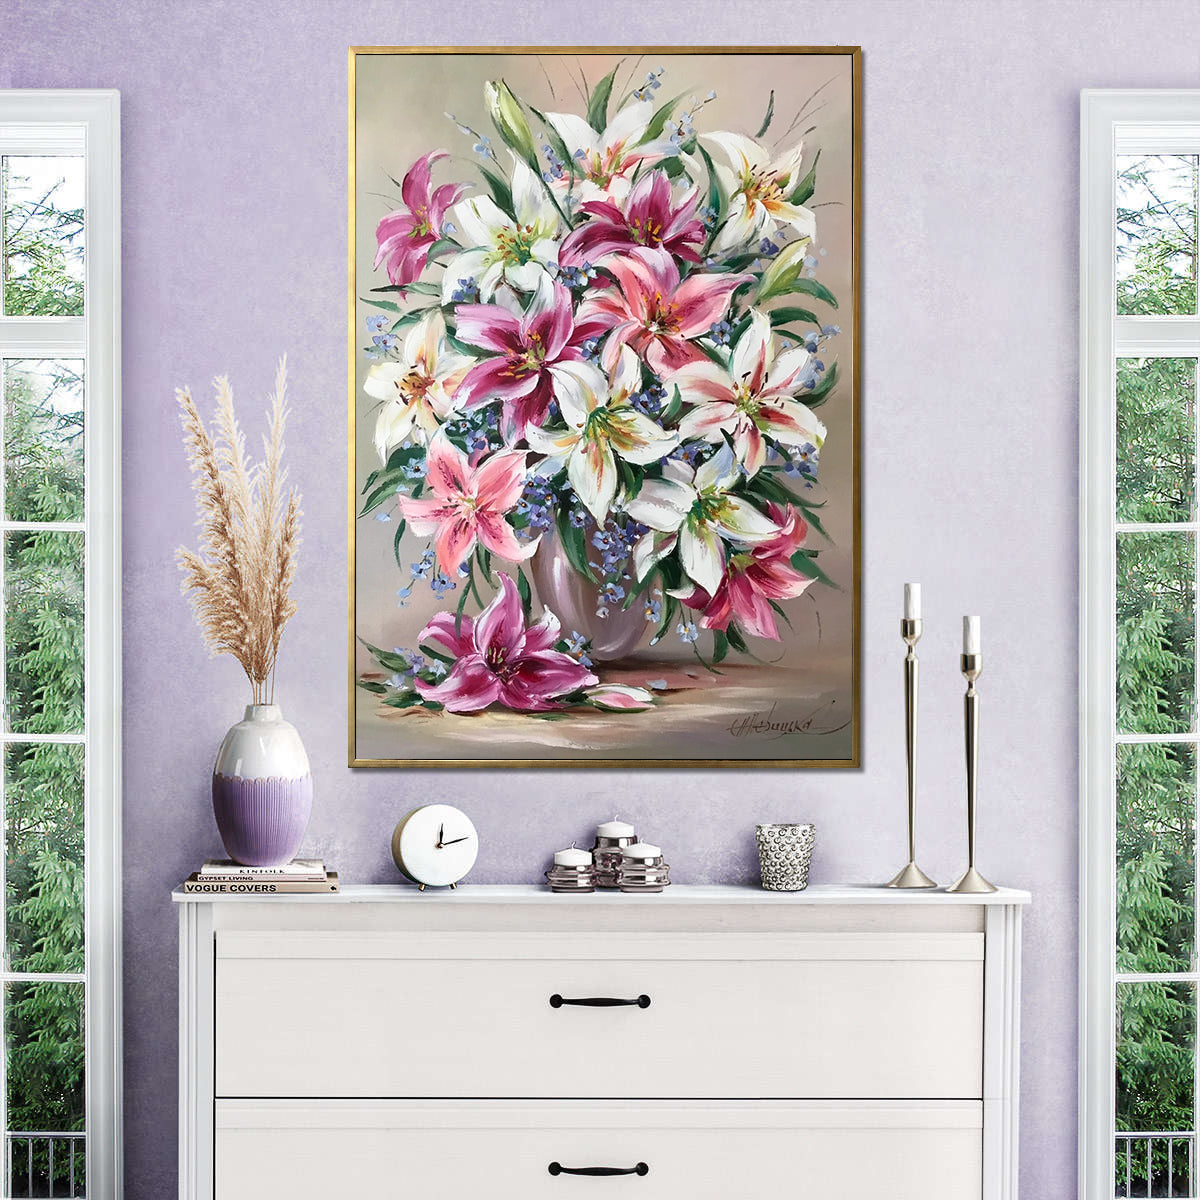 Stargazer Lily Painting on Canvas Pink Flowers Canvas Wall Art Flowers in Vase Art Work Large Lily Oil Painting Original Artwork